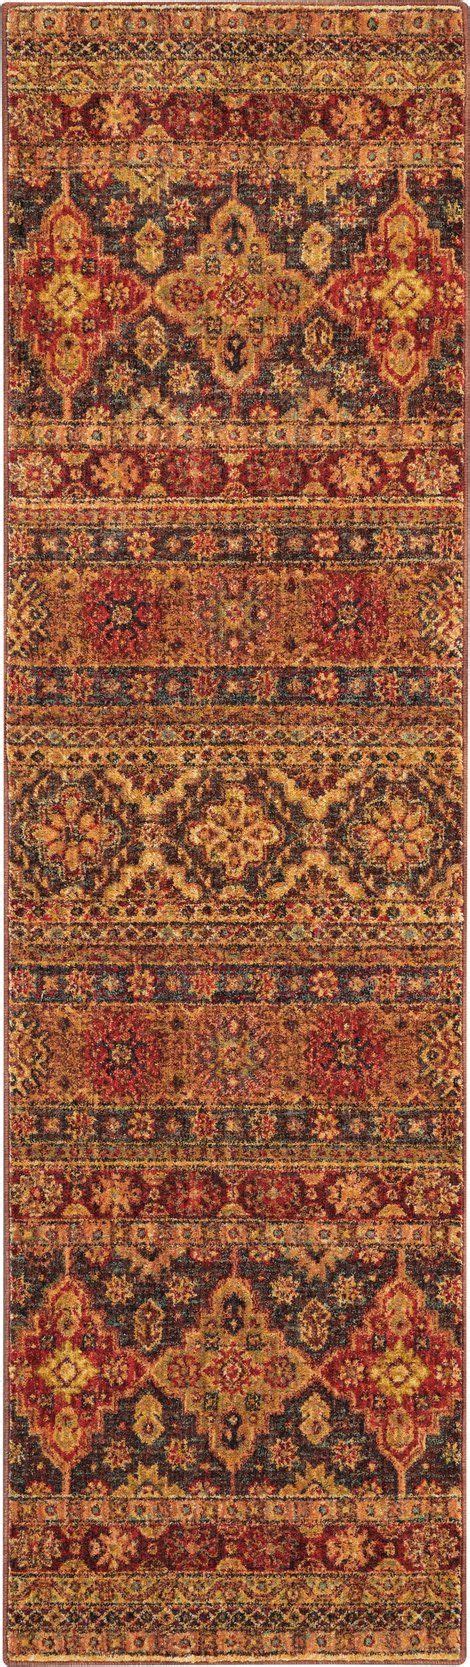 Safavieh Classic Cl763b Red Navy Rug Rugs Vintage Persian Rug Red